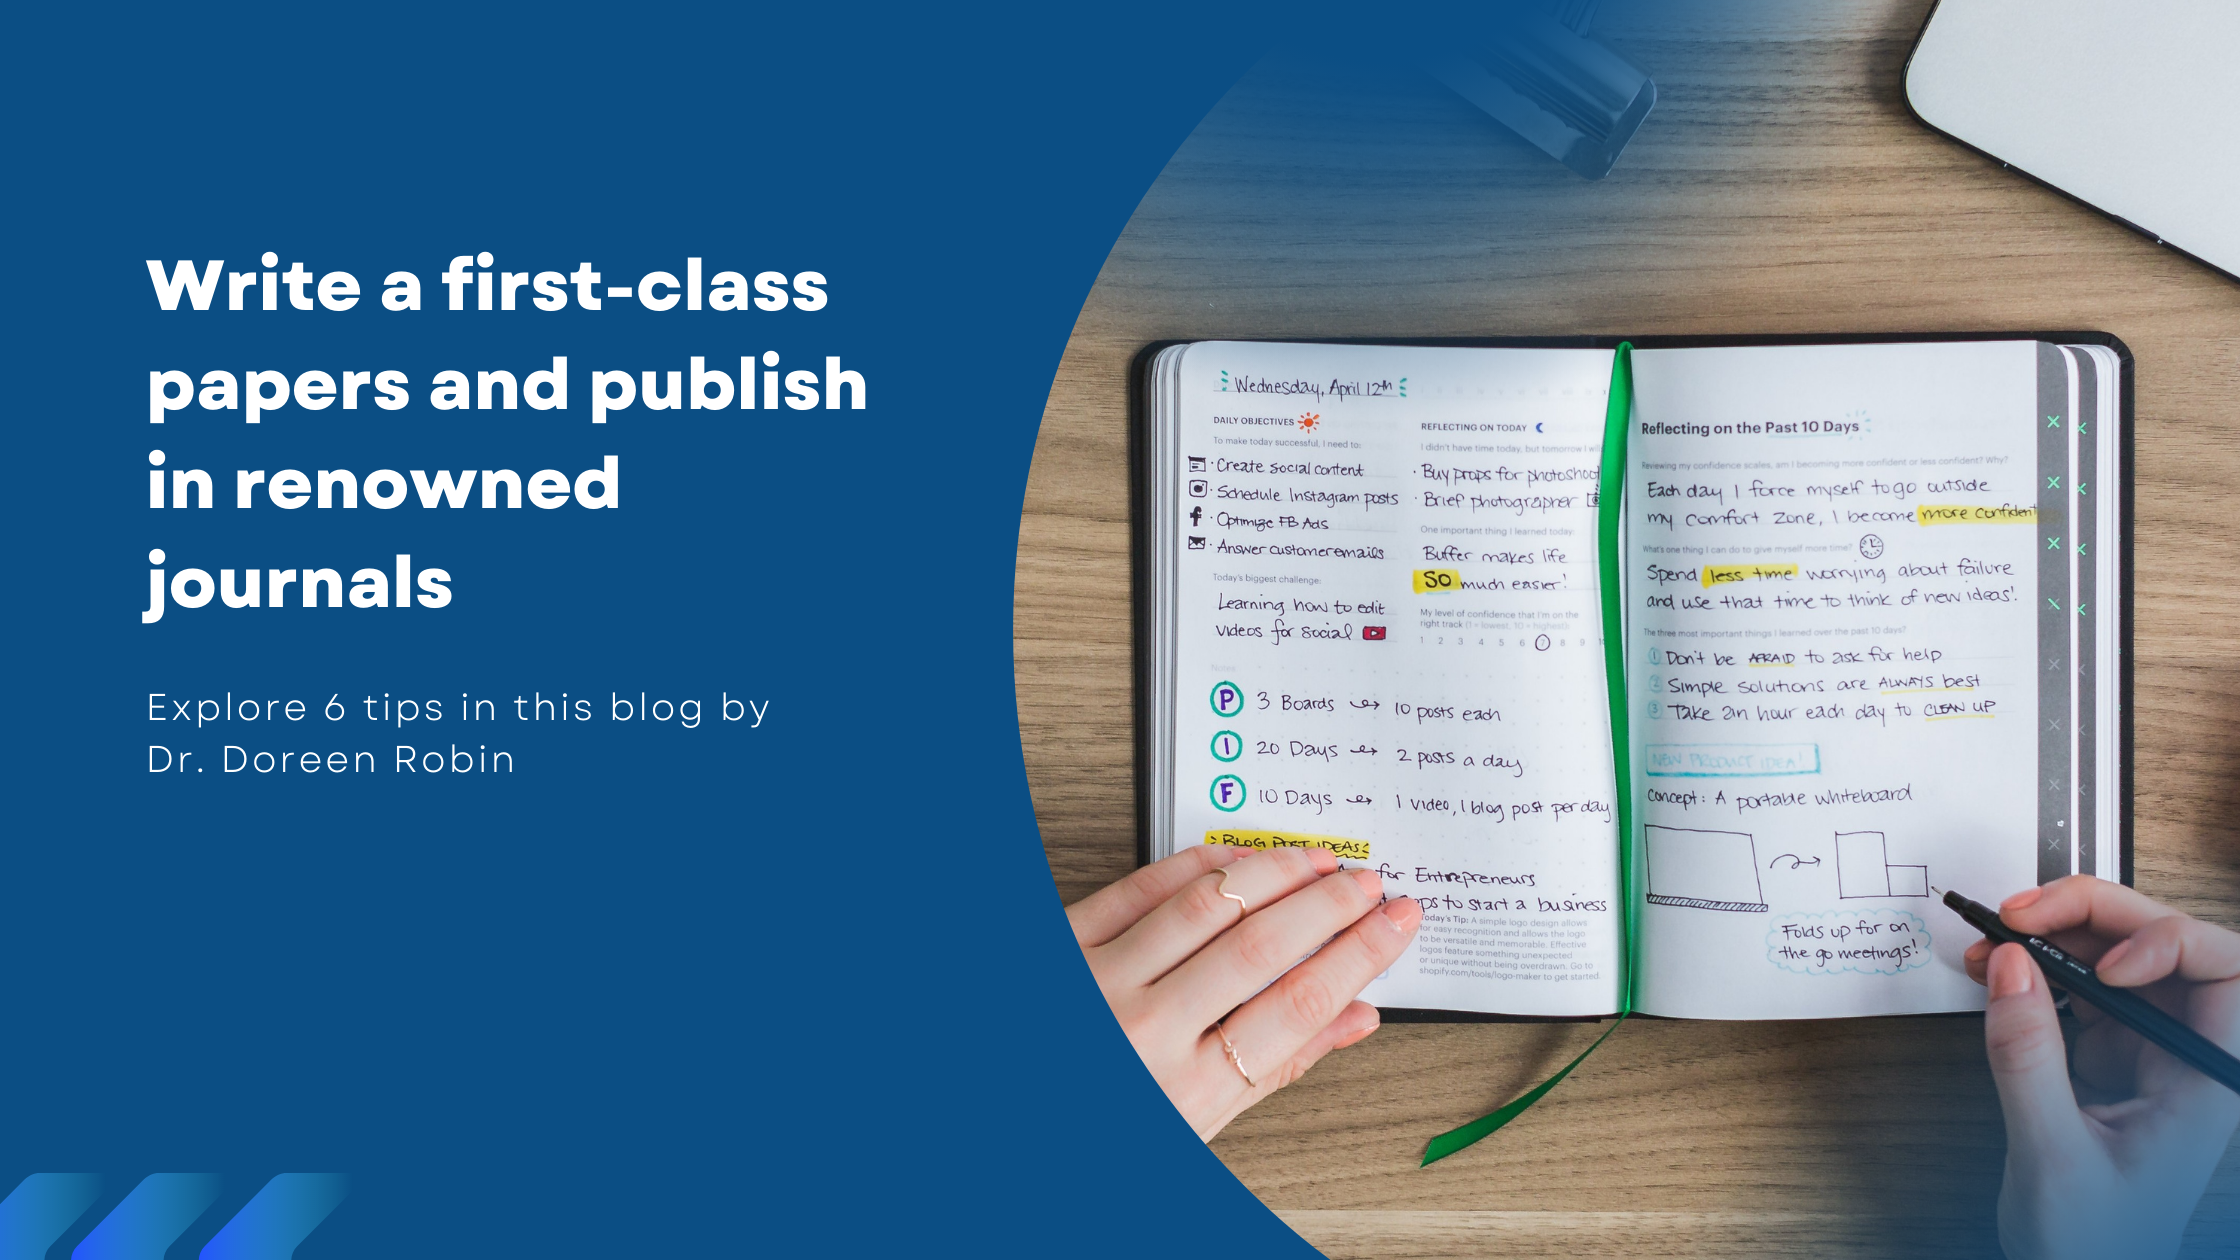 Six tips on how to write a first-class paper and publish in renowned journals